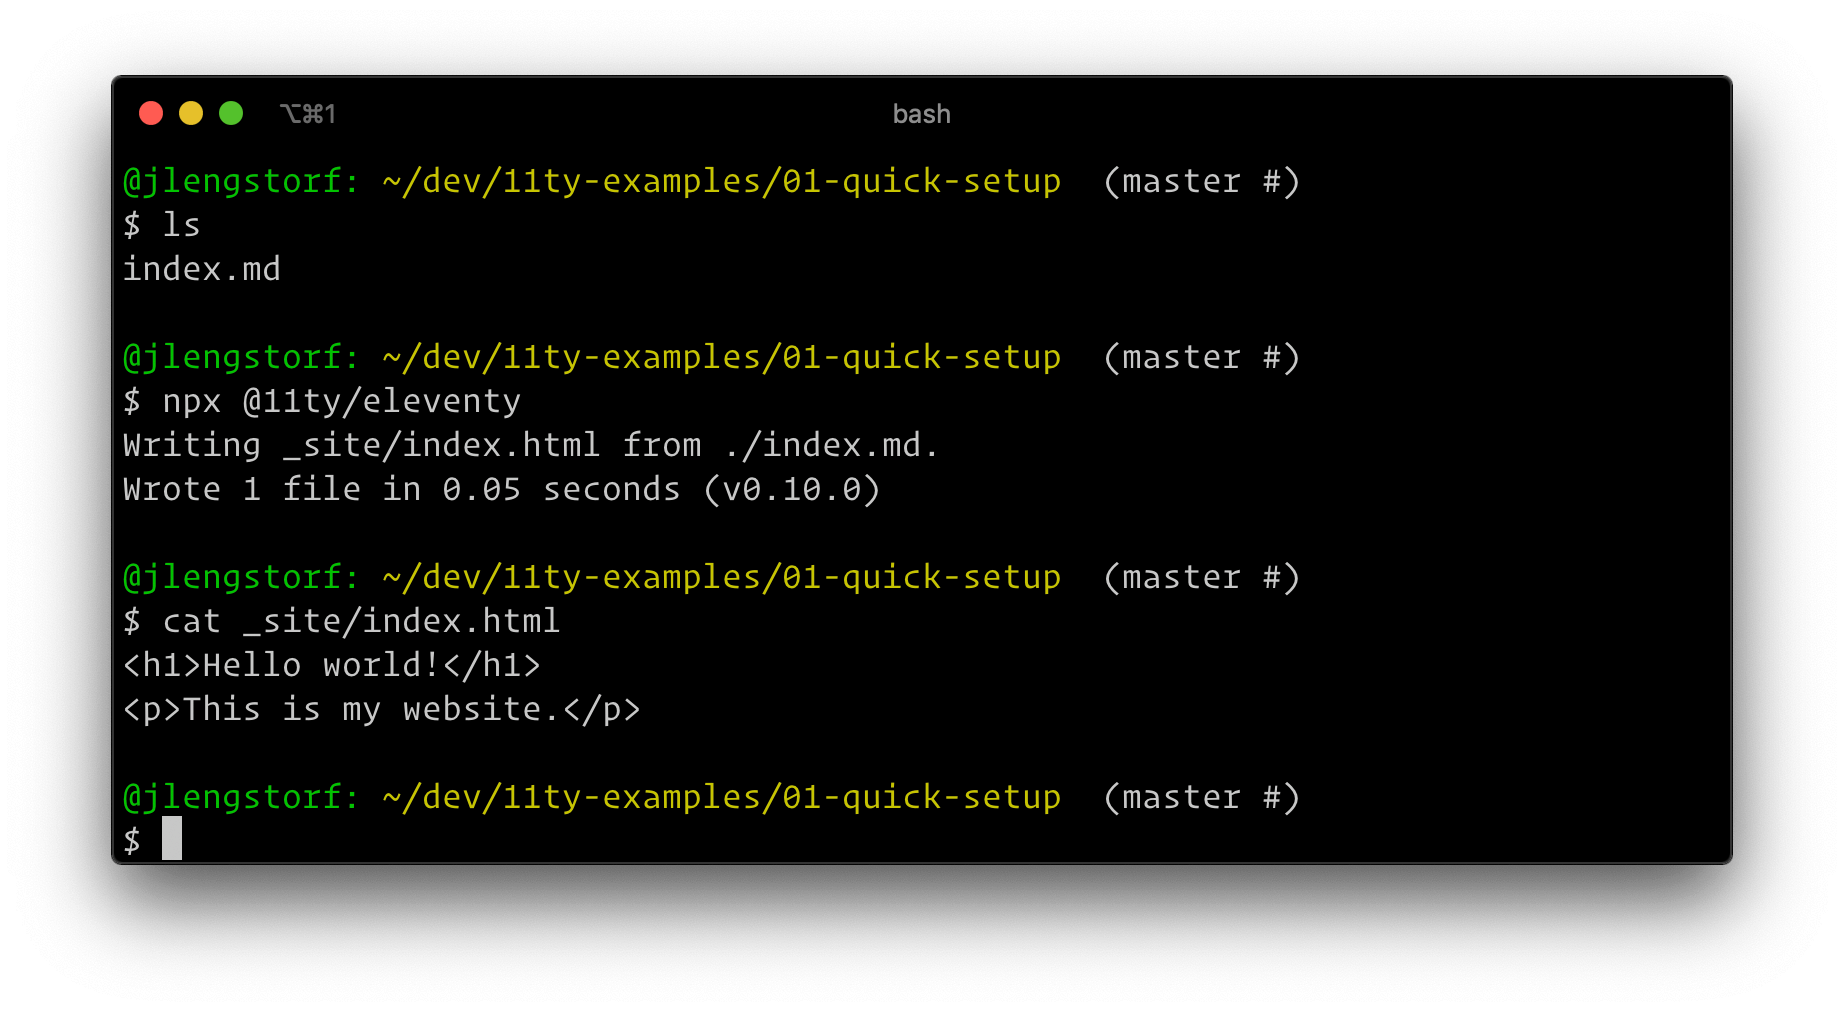 A screenshot of the above steps being run in the CLI.